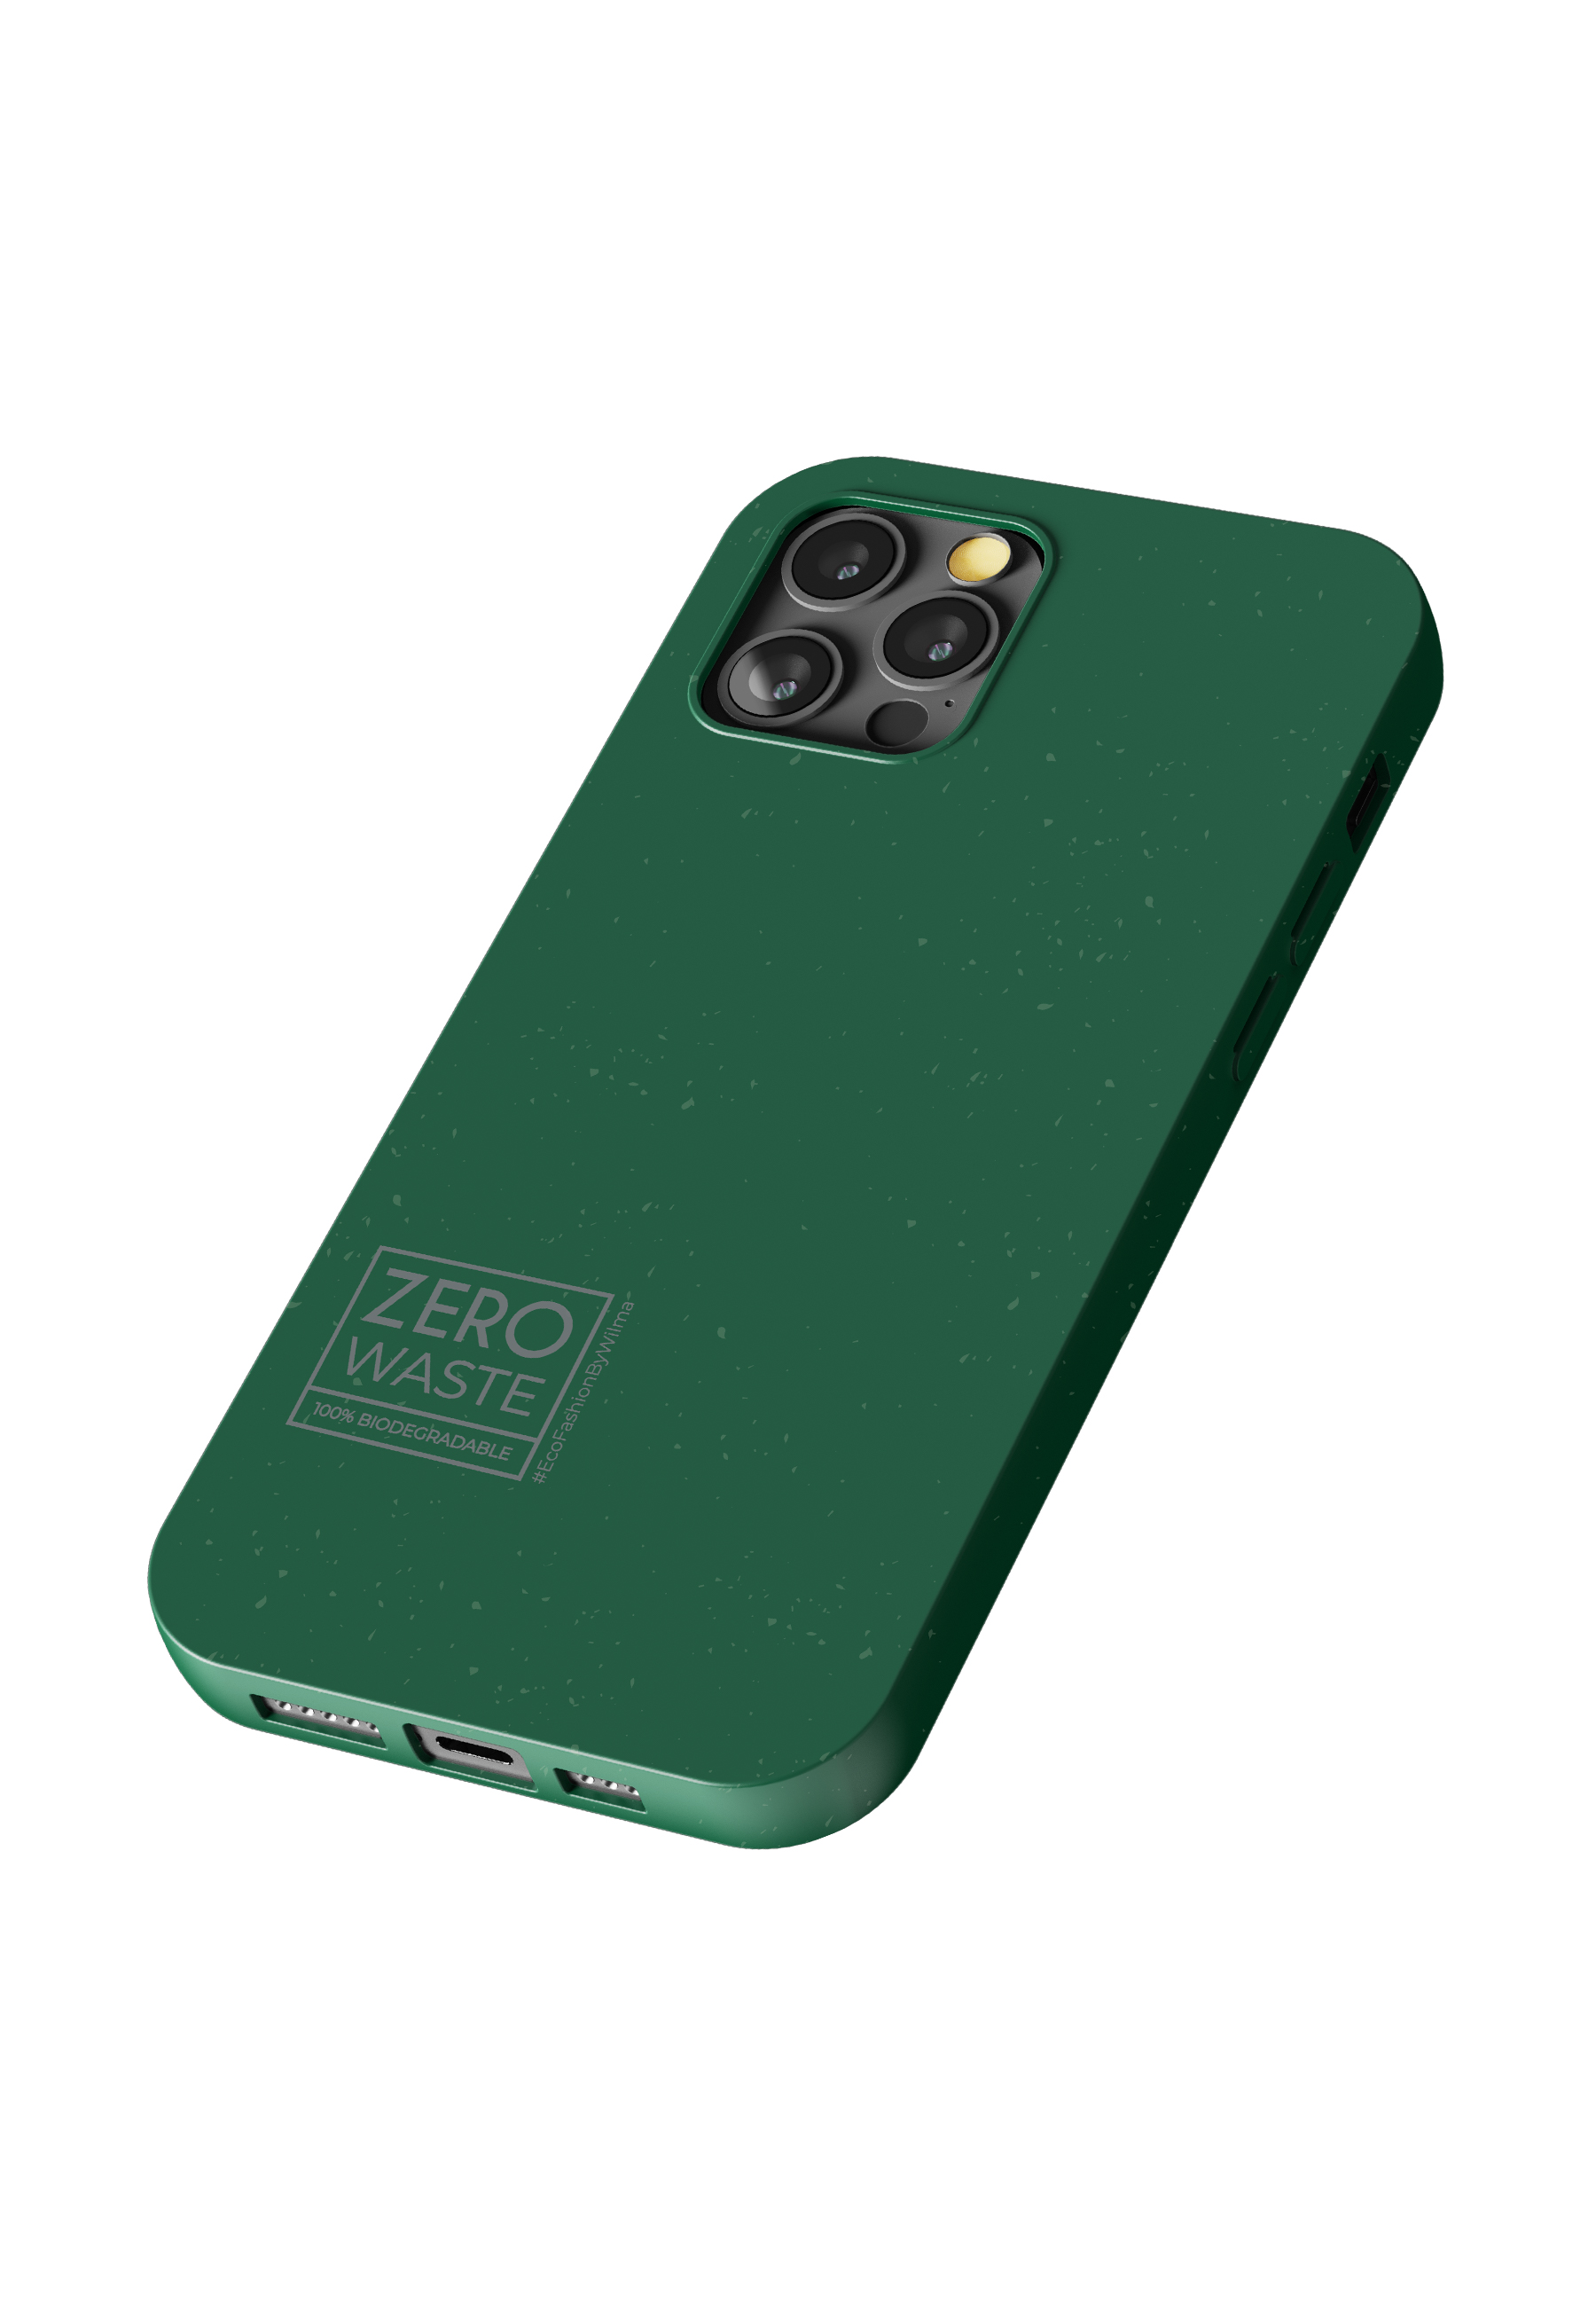 Backcover, BY ECO 12 P12PM, Pro WILMA iPhone FASHION Apple, green Max,